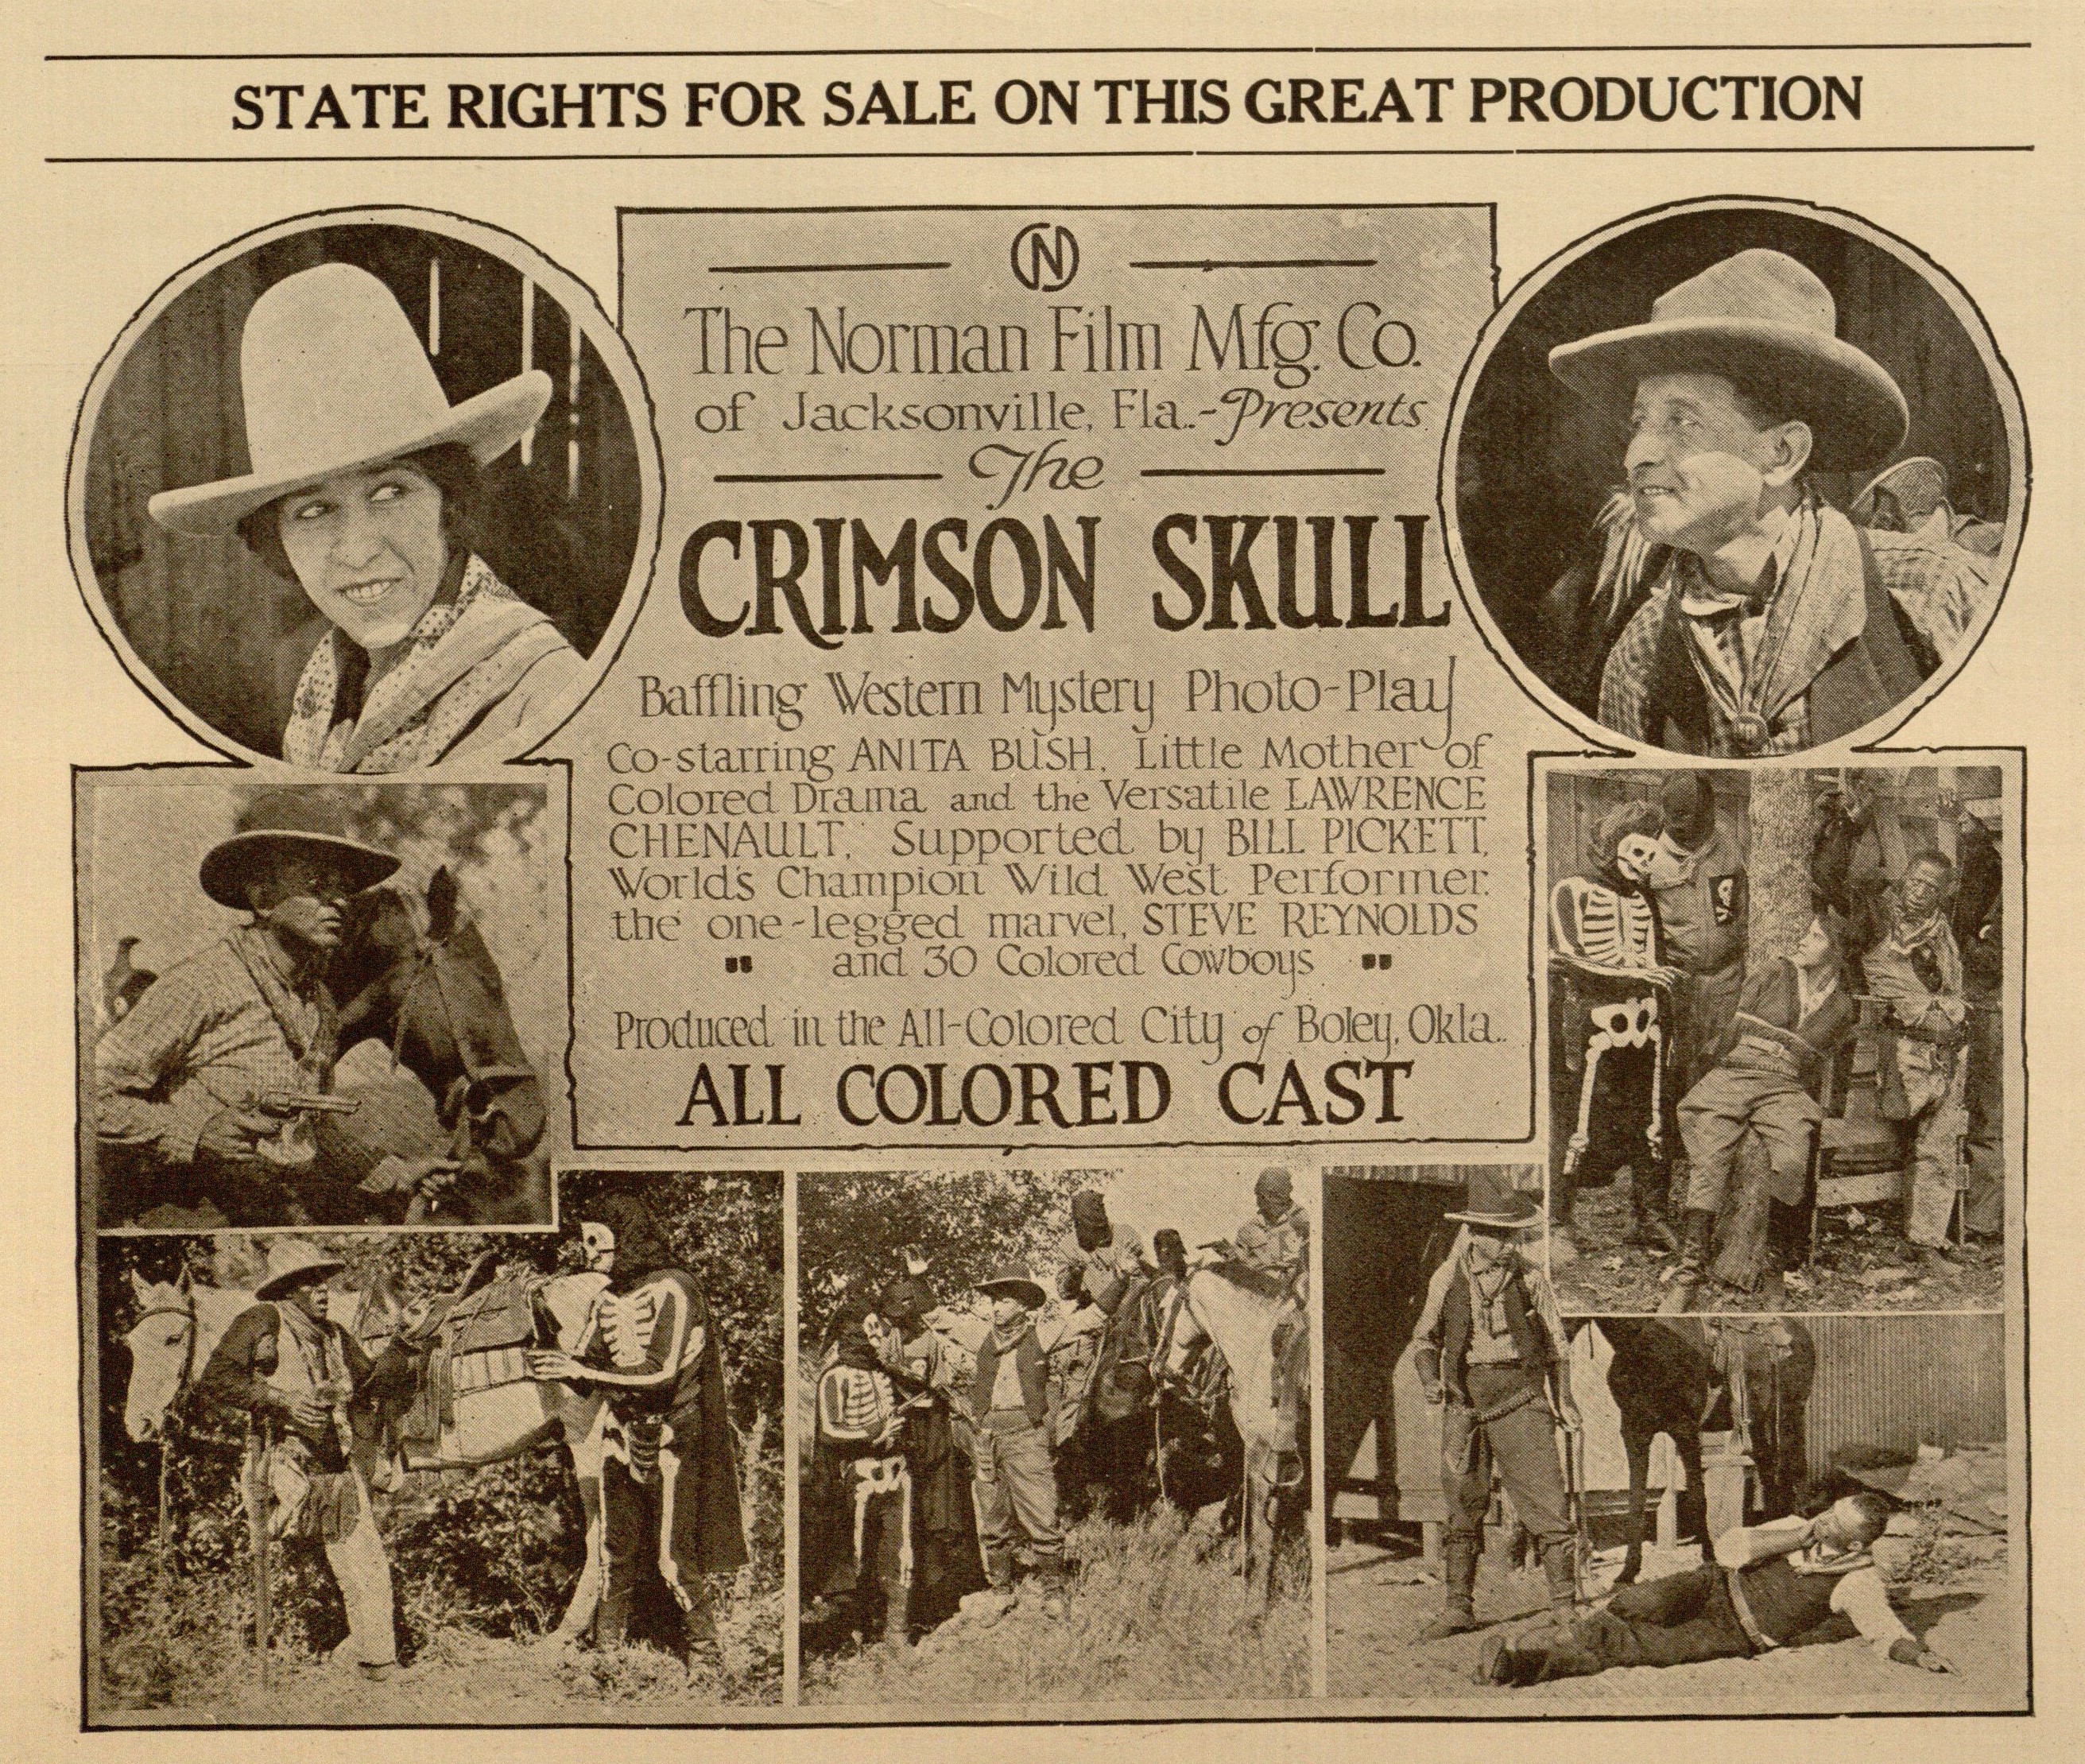 An advertisement for a black western film